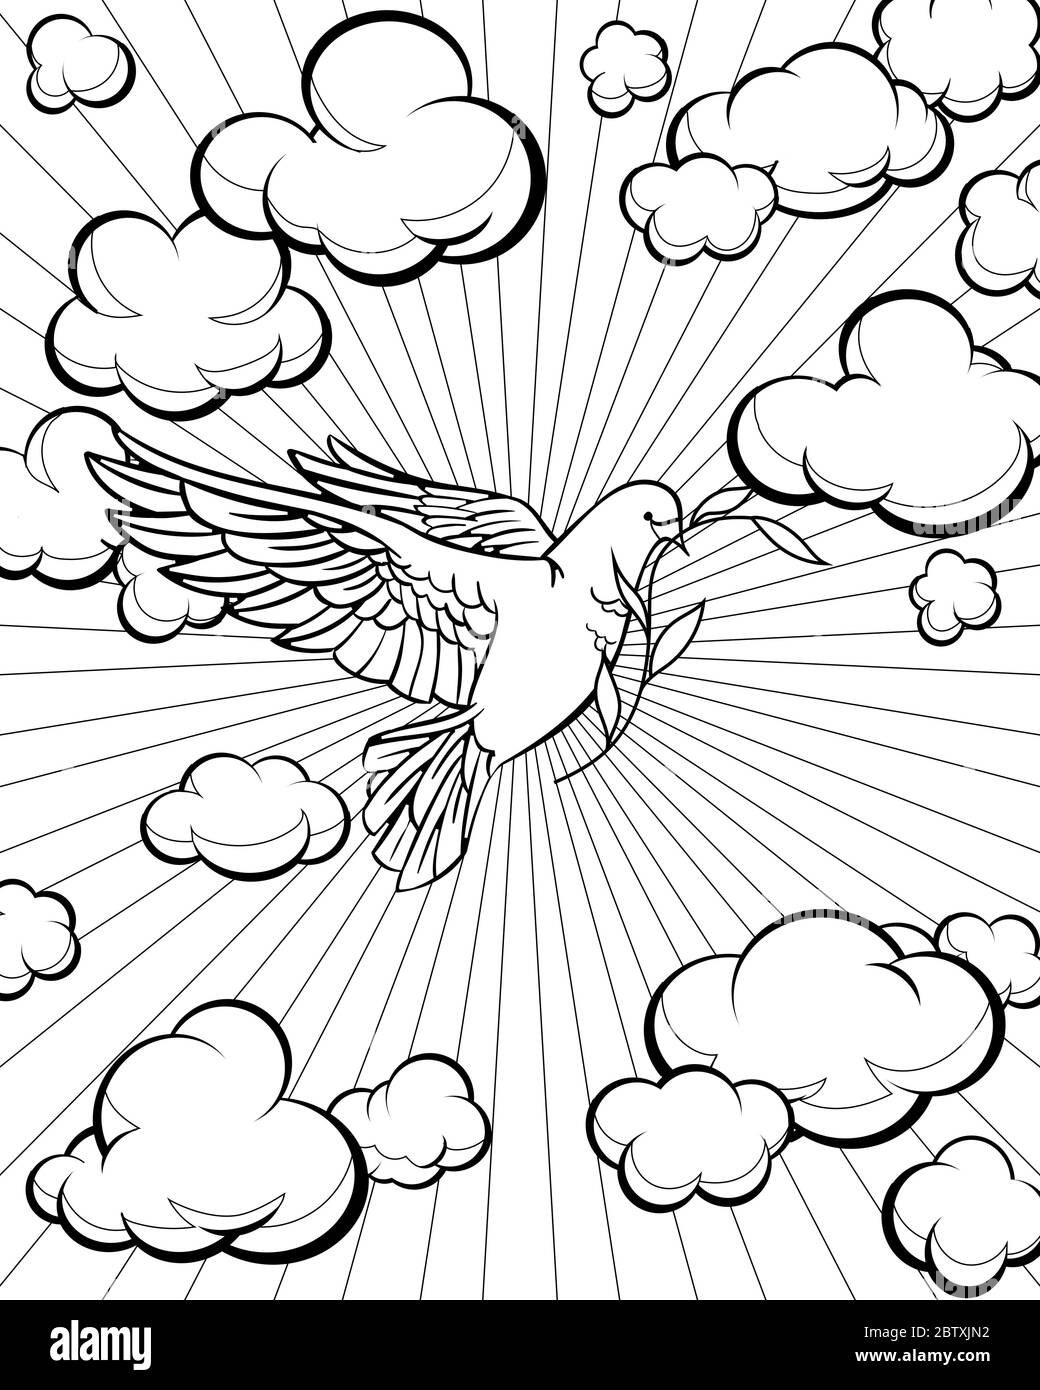 Dove in the sky coloring page. Bible story. Stock Vector